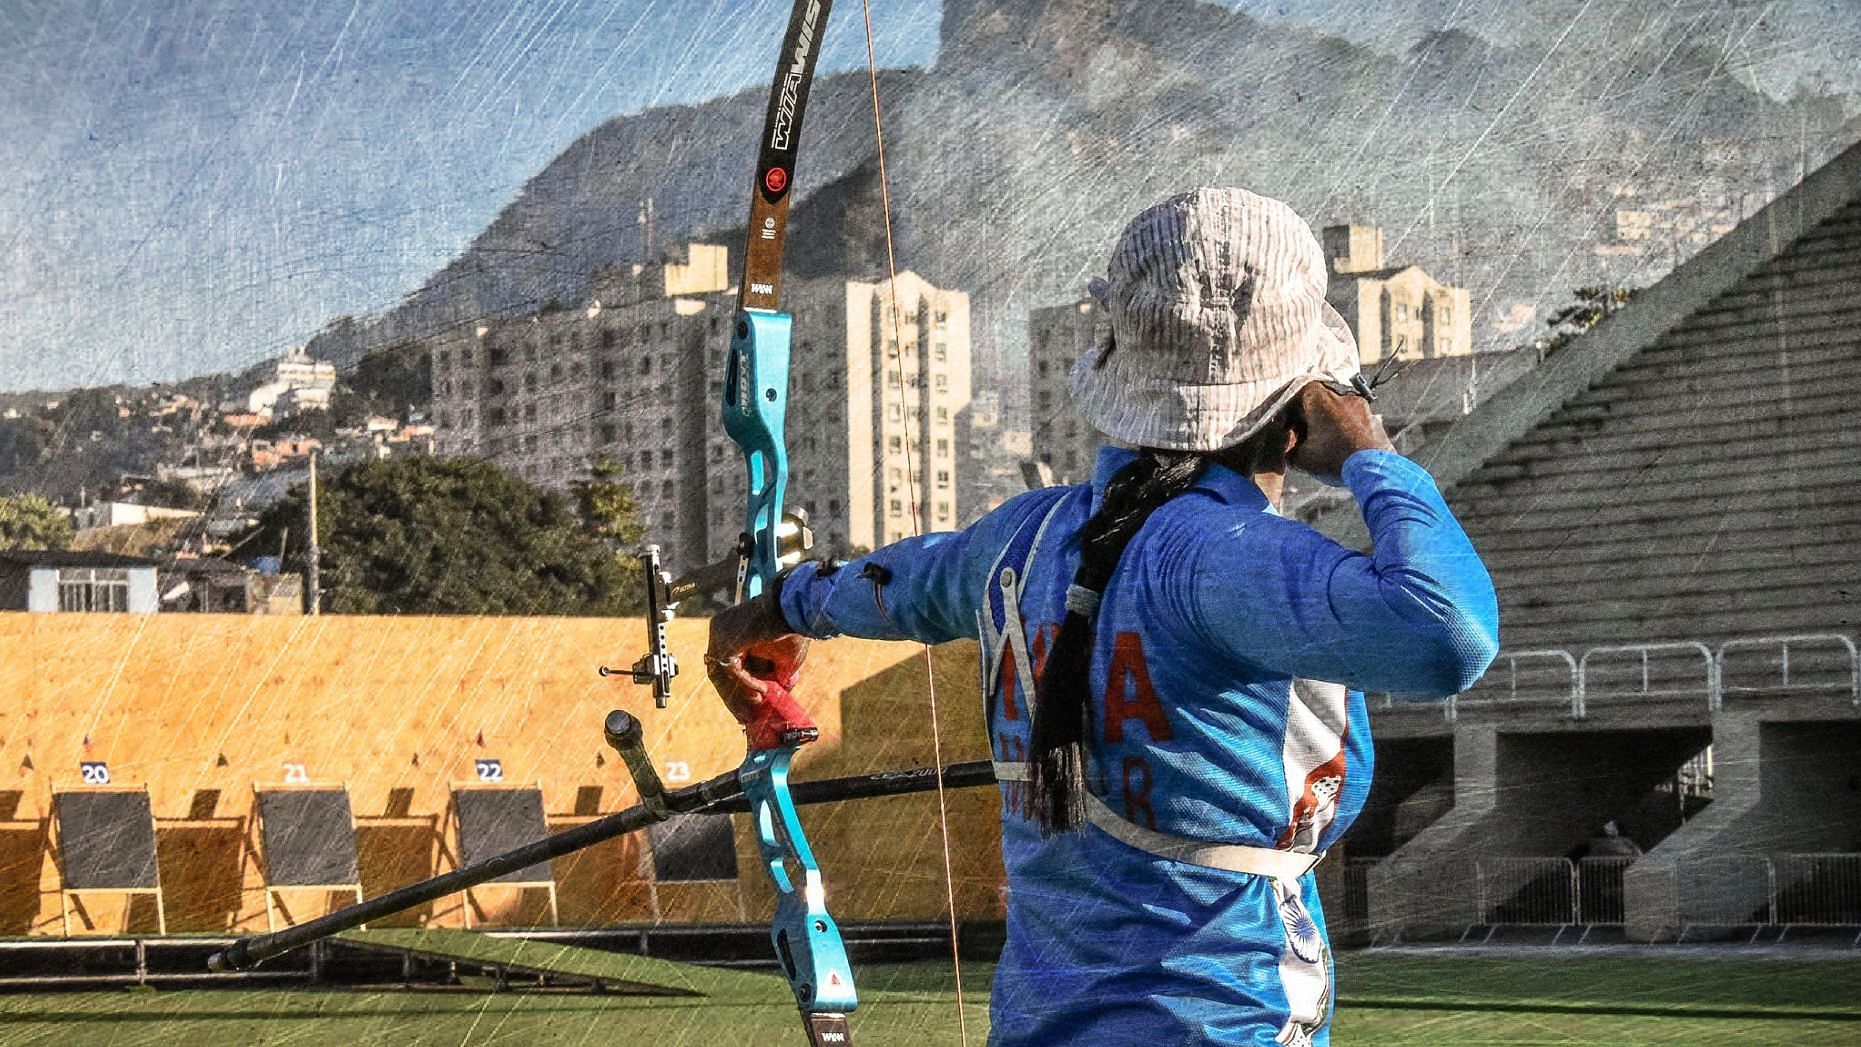 The Archery Association of India (AAI) is contemplating taking legal action against the Dutch airline KLM after the national team were forced to miss the World Cup.